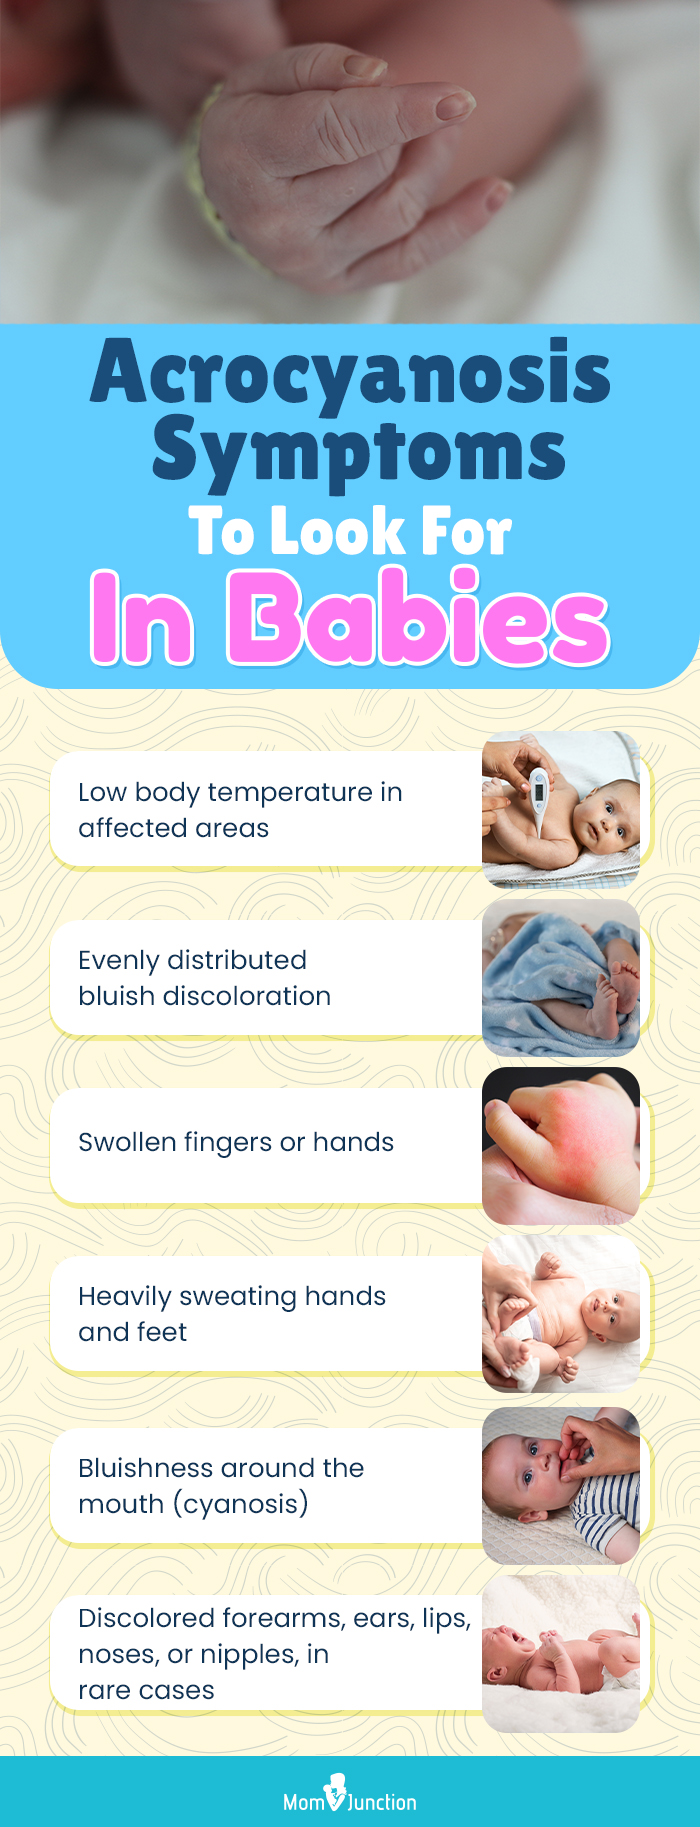 acrocyanosis symptoms in babies to look for (infographic) 